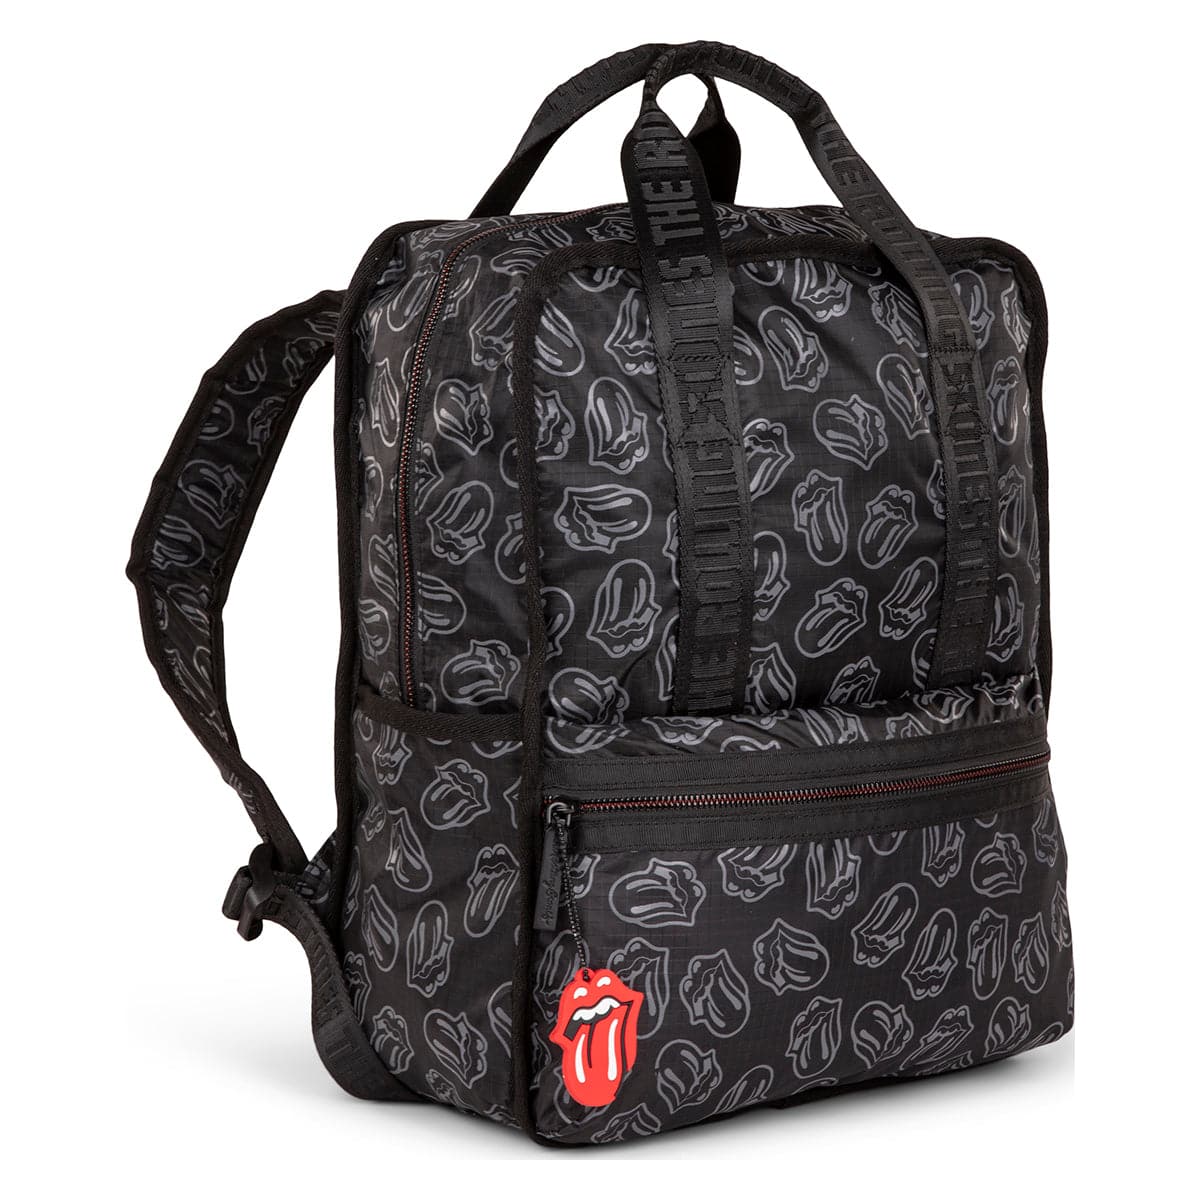 The Rolling Stones Evolution Backpack